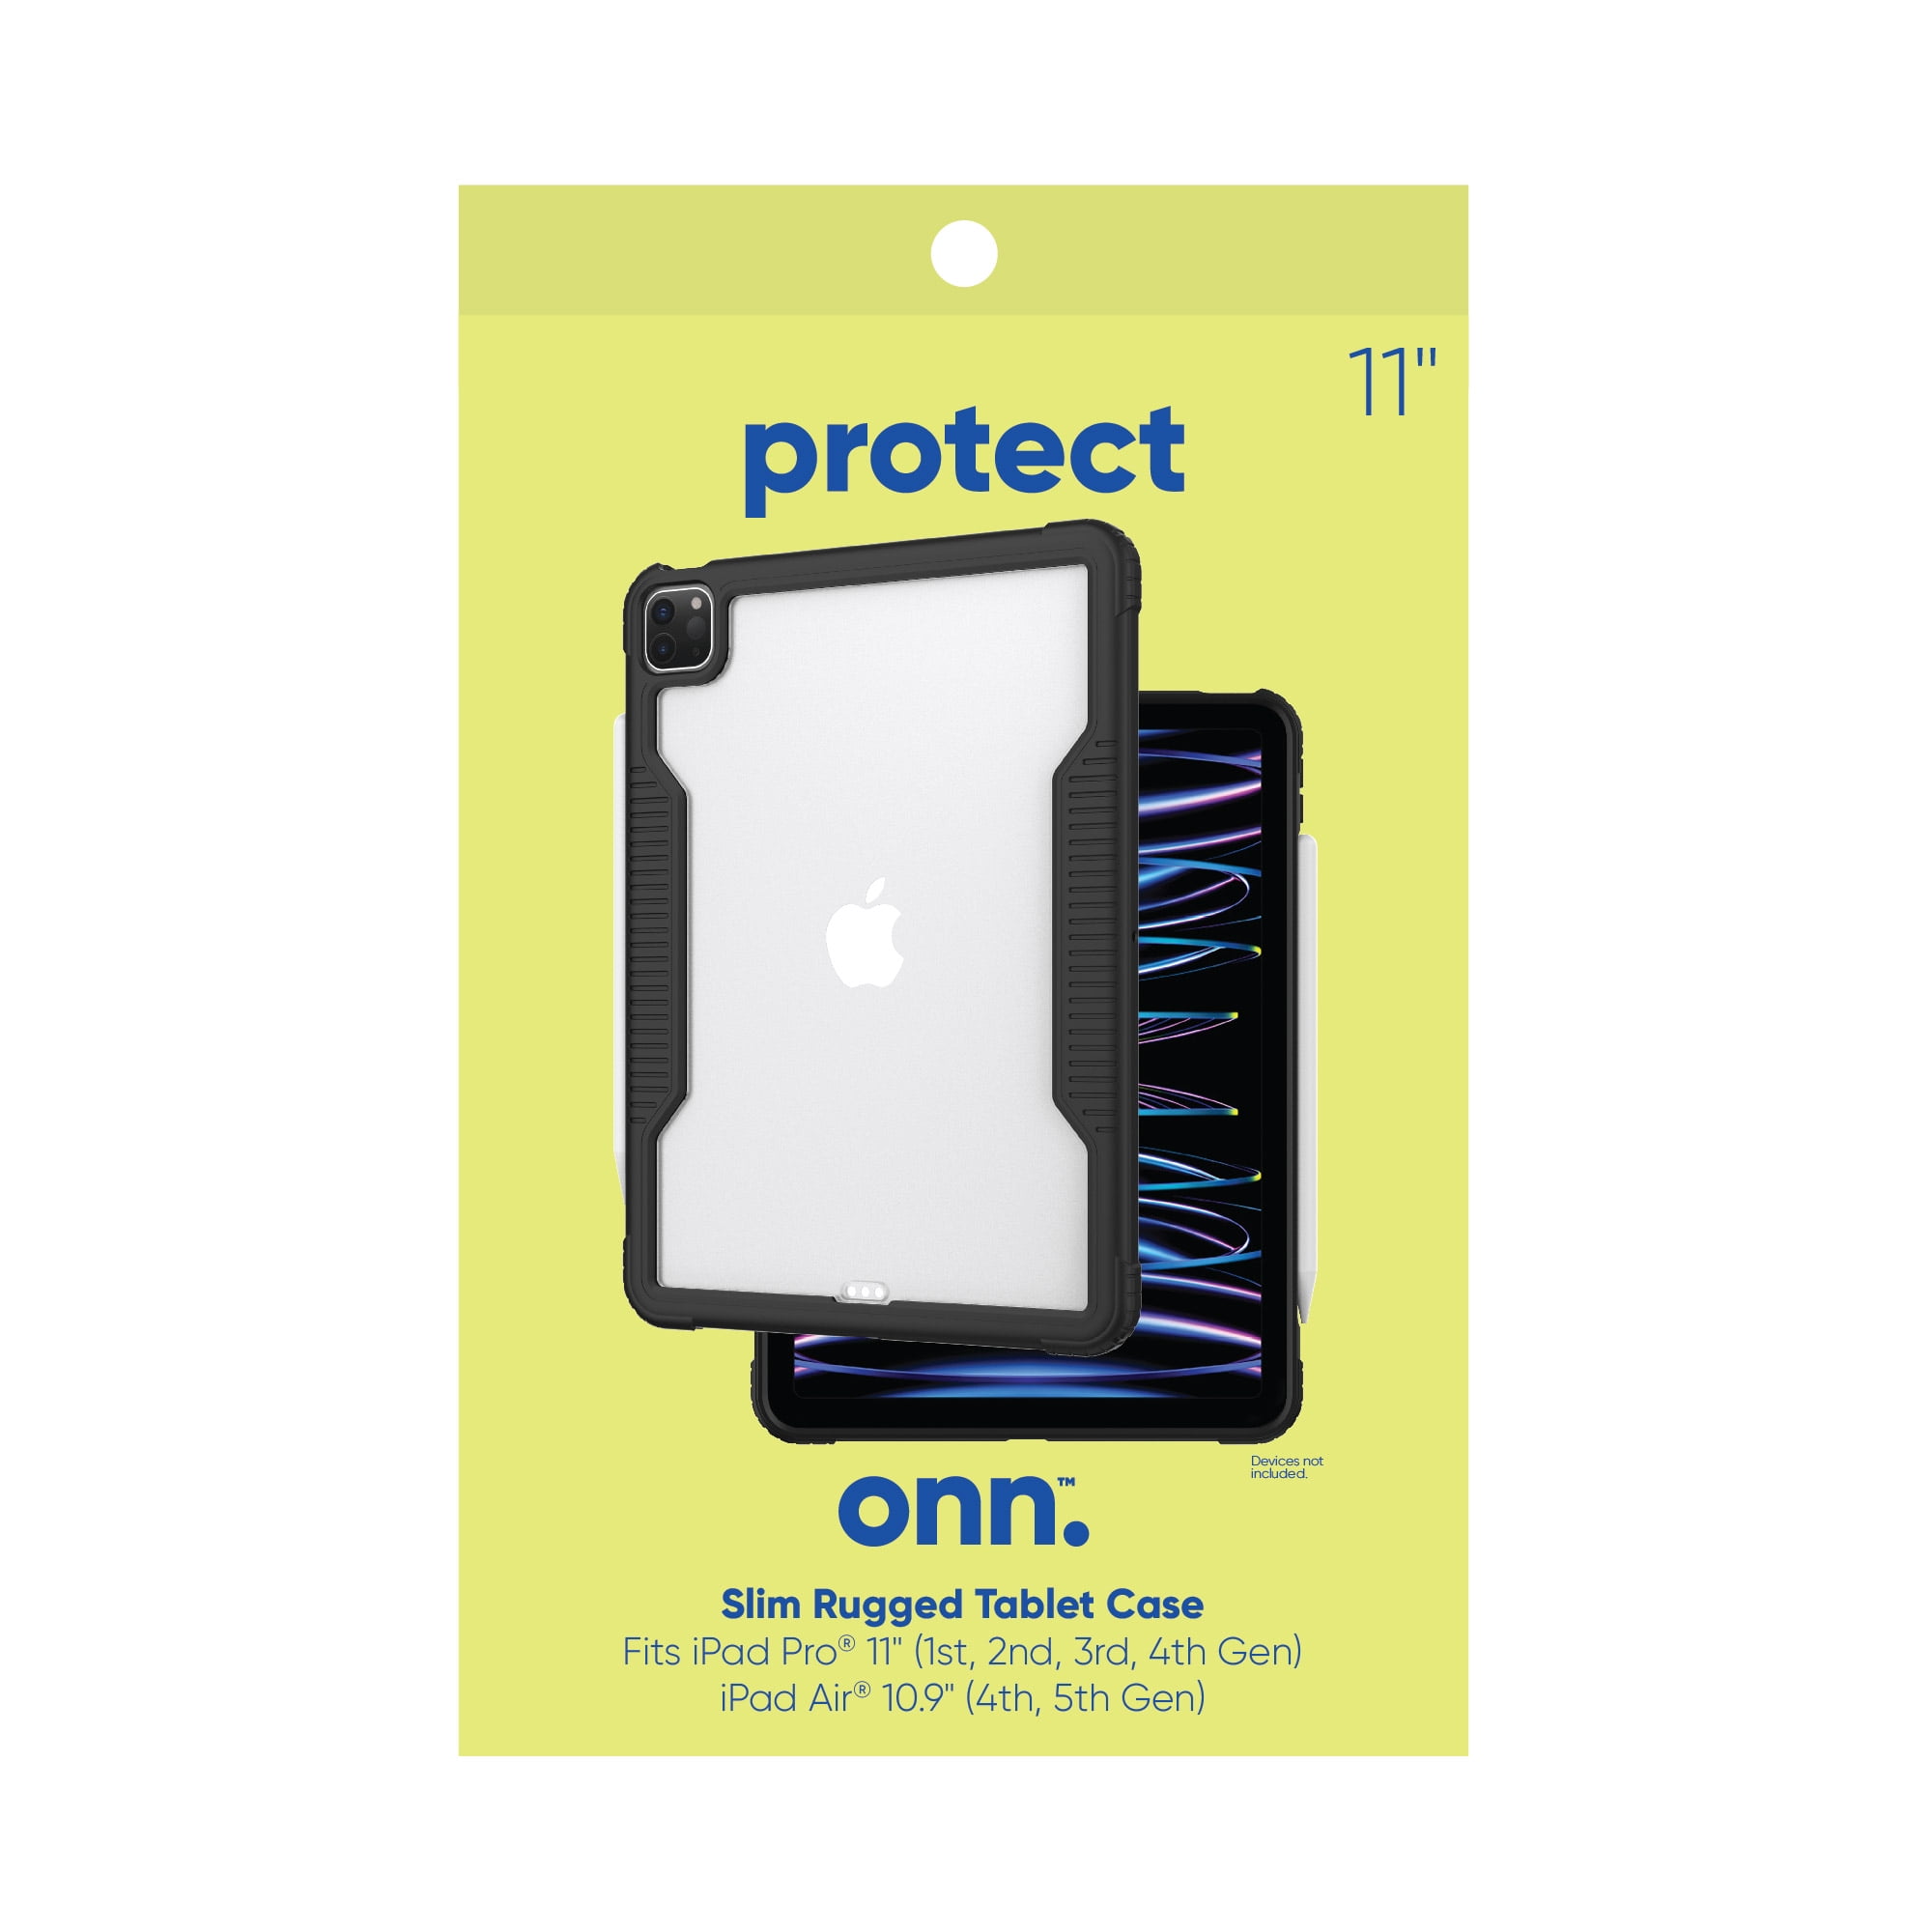 onn. Glass Screen Protector for iPad (10th generation) / iPad Pro 11''  (1st, 2nd, 3rd, 4th generation) / iPad Air (4th, 5th generation) 